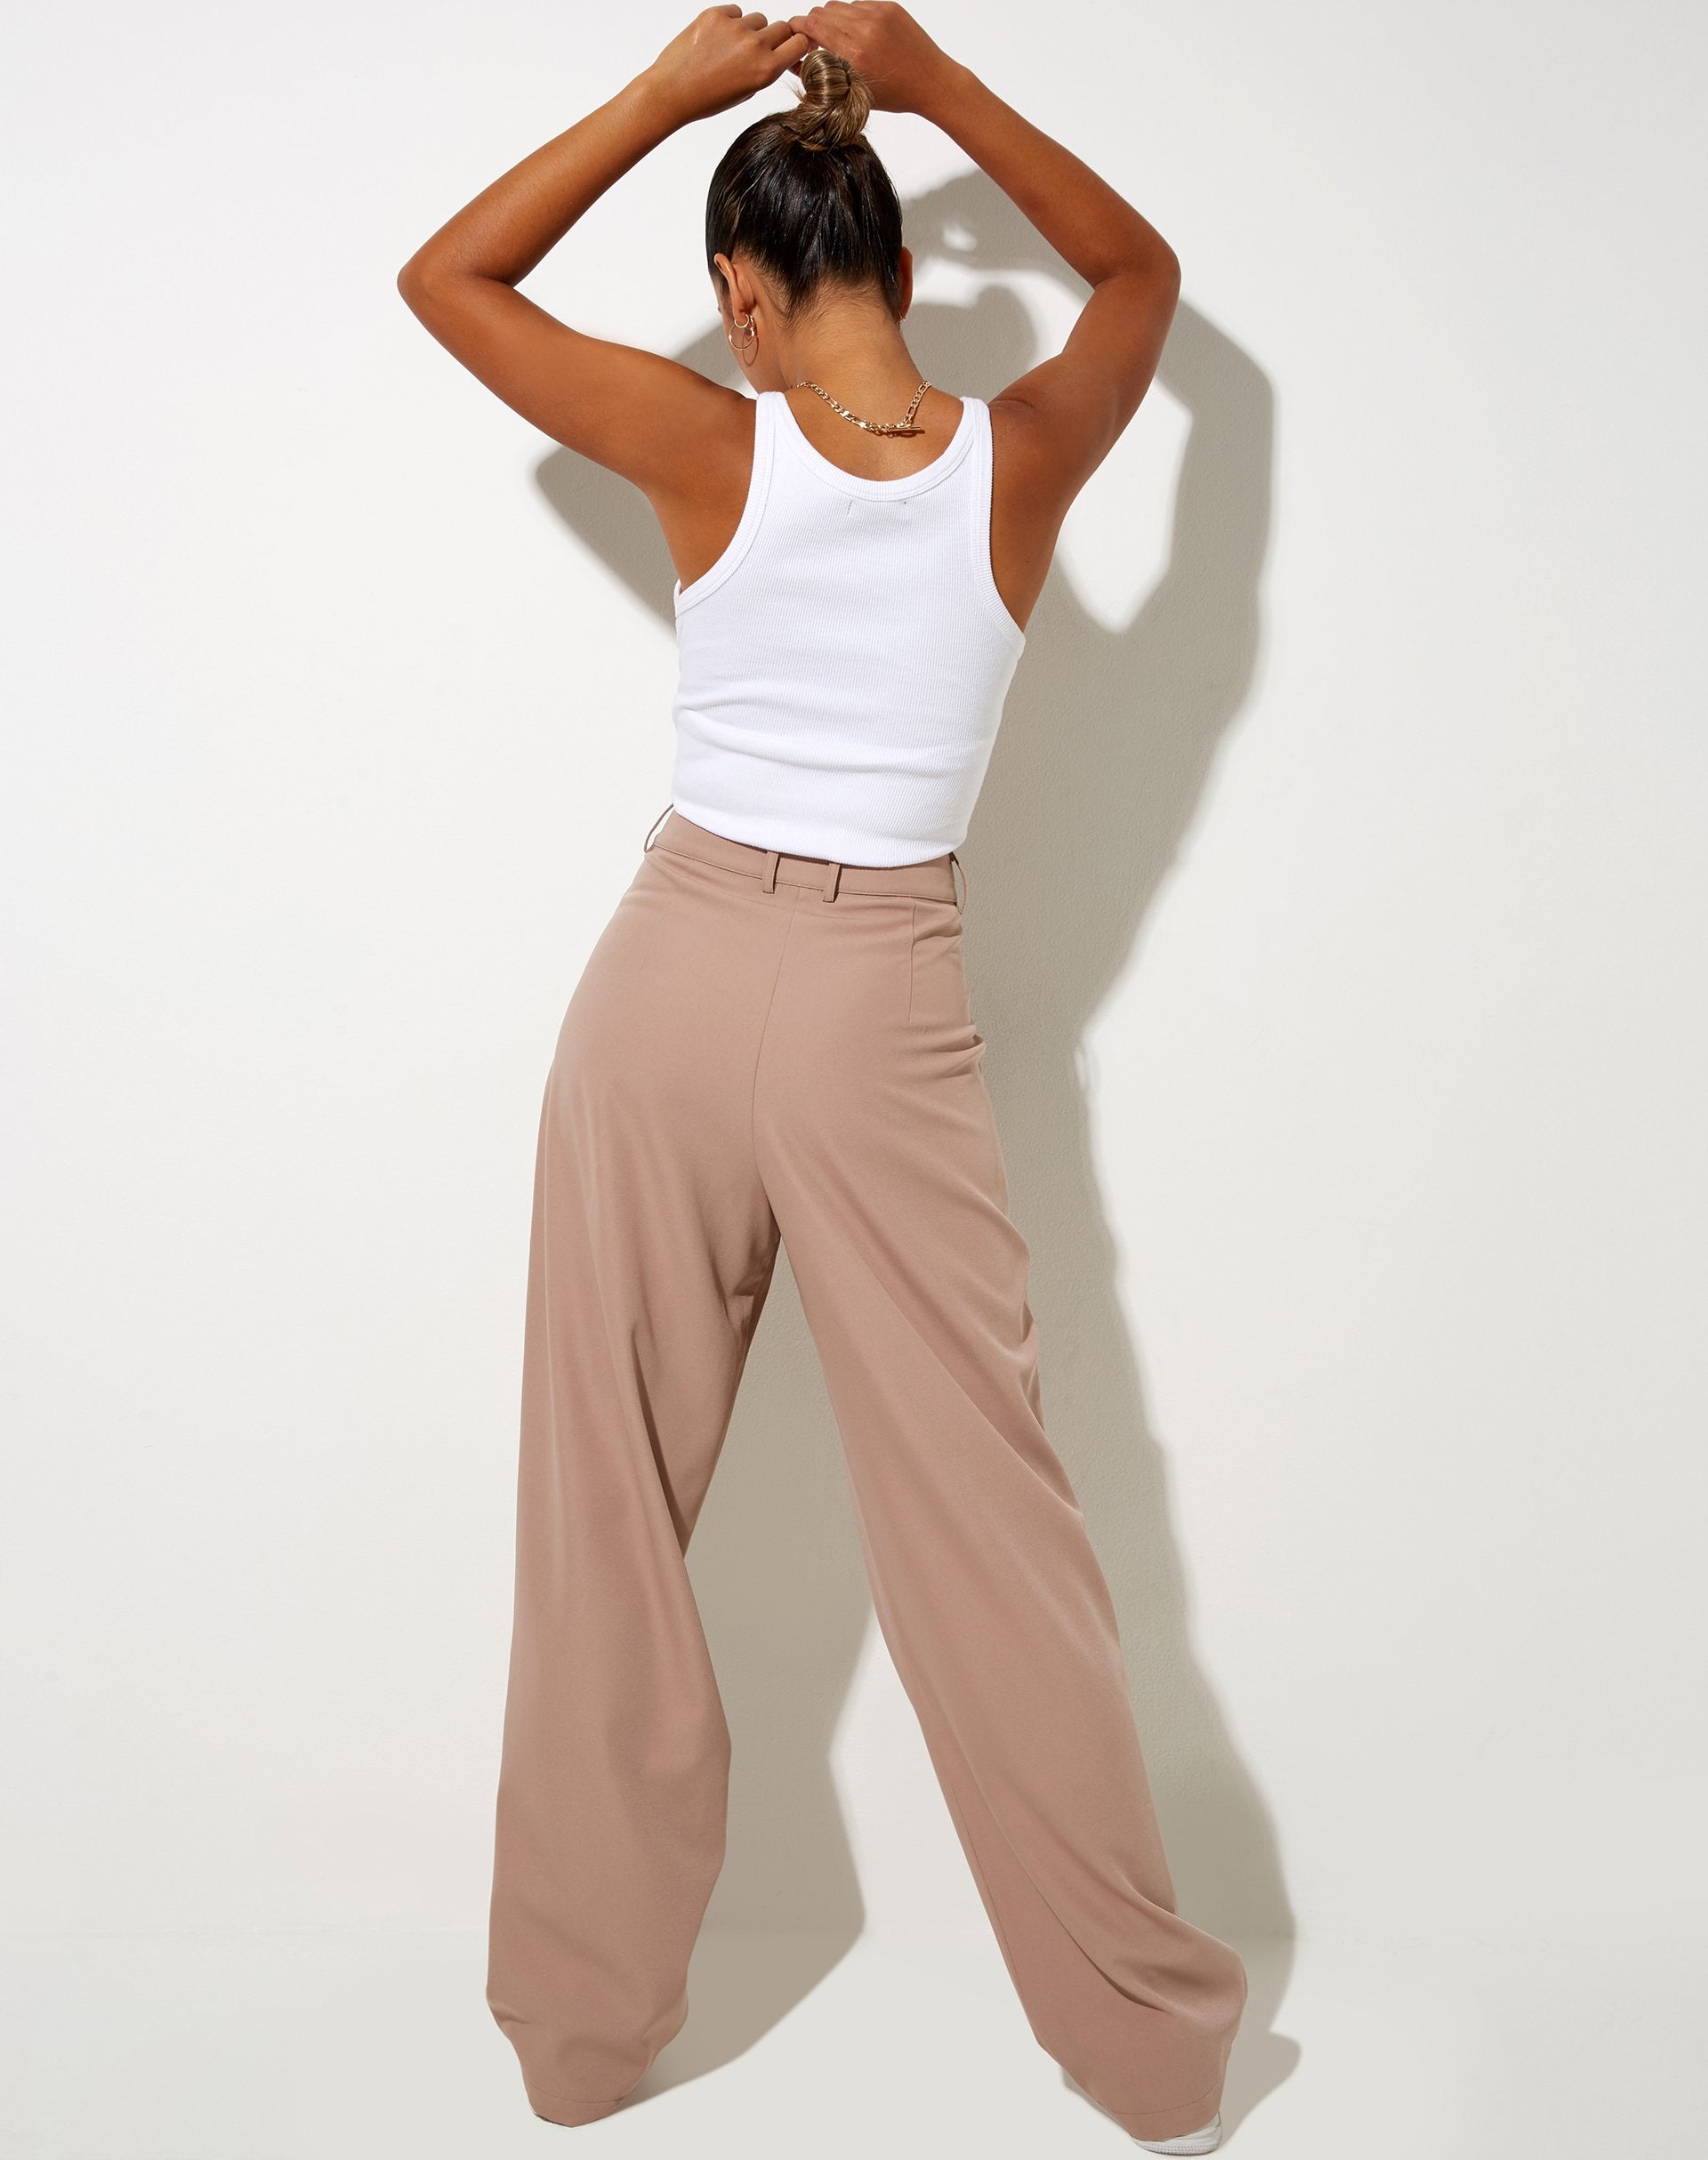 Image of Sakila Trouser in Tailoring Dusty Lilac